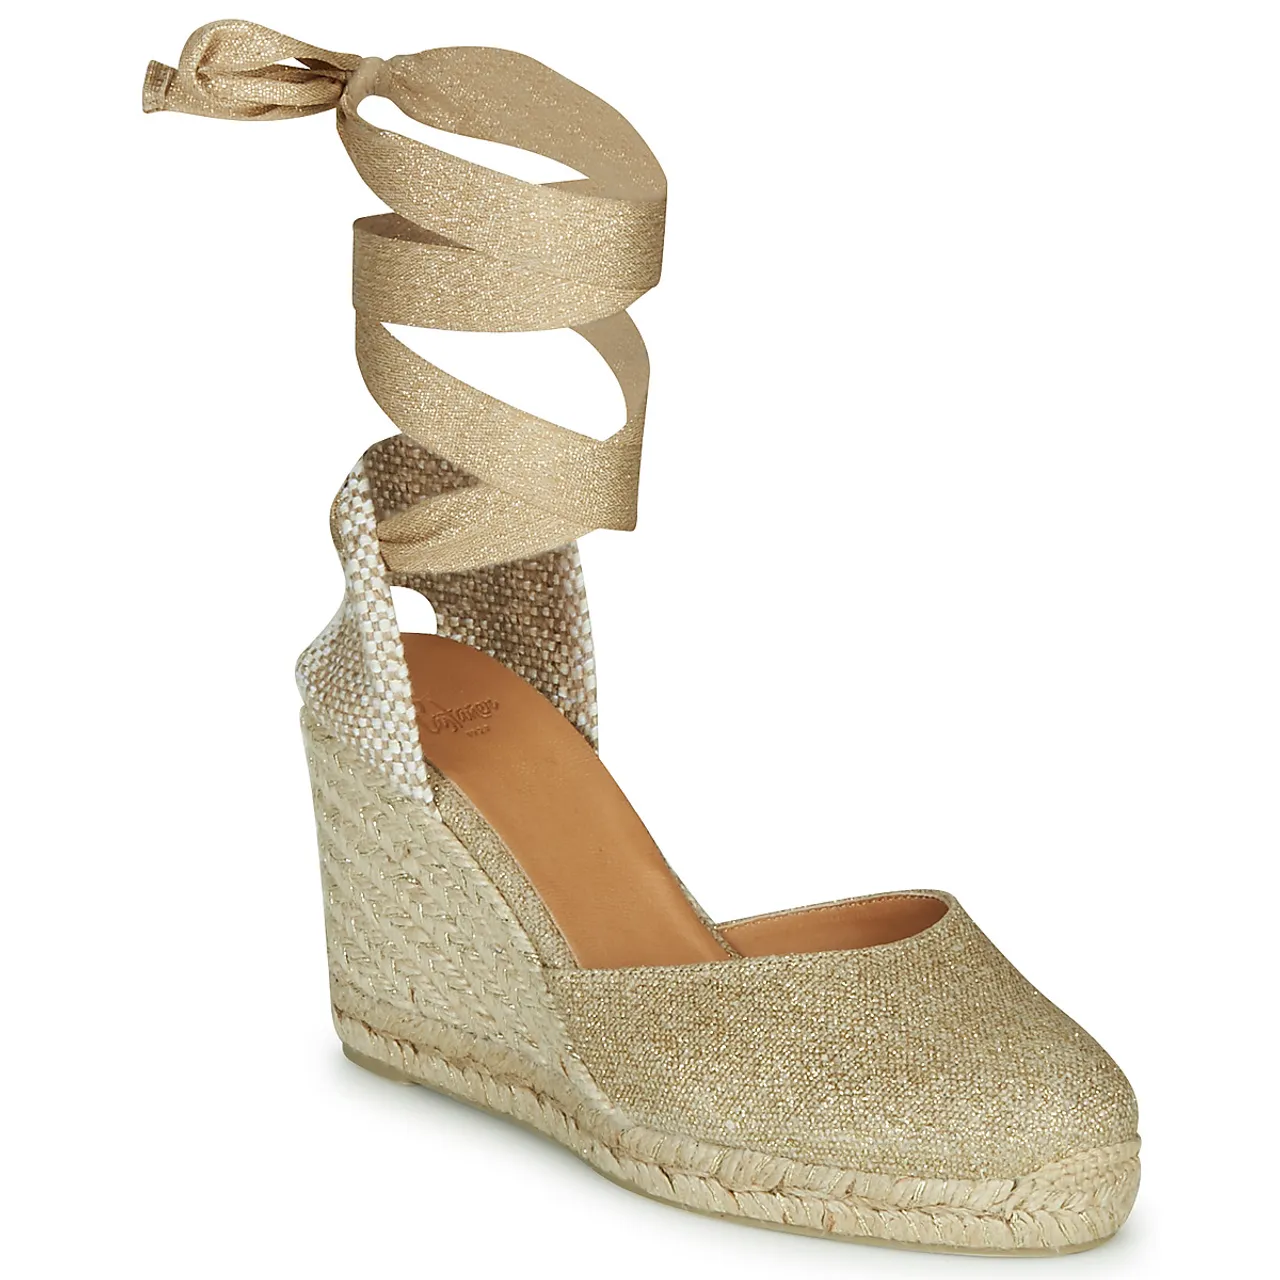 Castaner  CARINA  women's Espadrilles / Casual Shoes in Gold